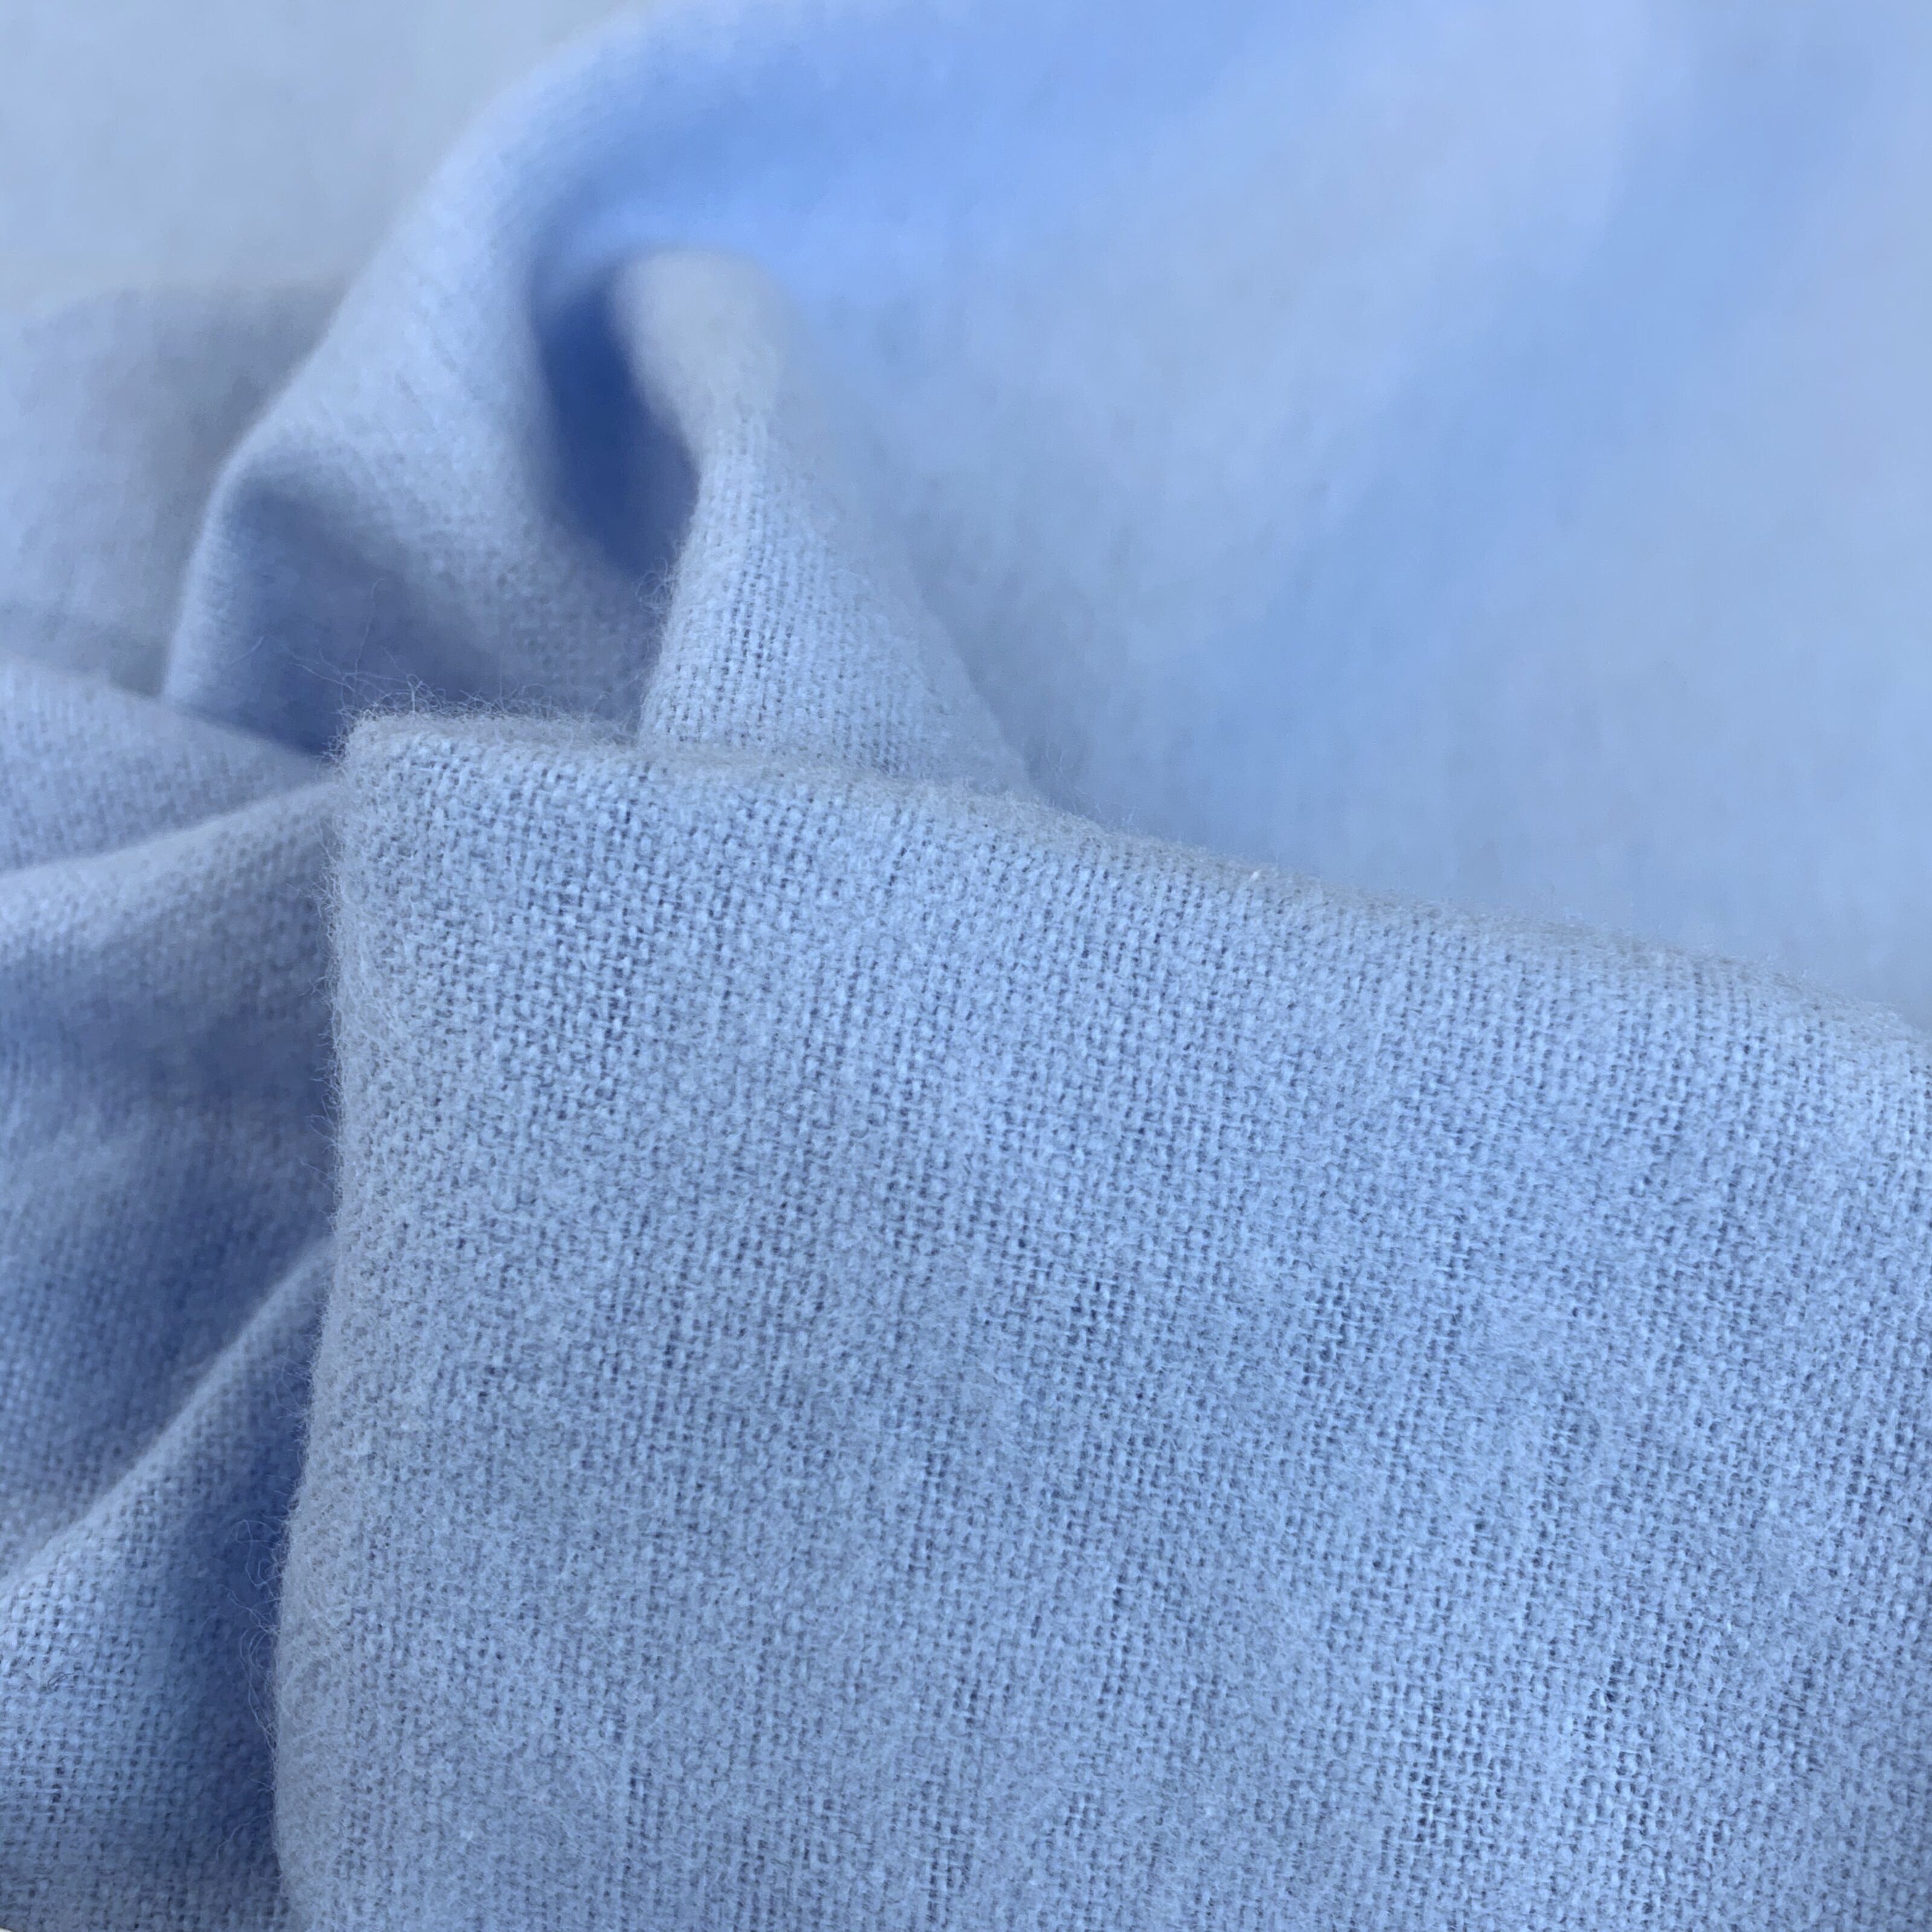 Pale Blue Brushed Cotton Winceyette (Flannel) Fabric